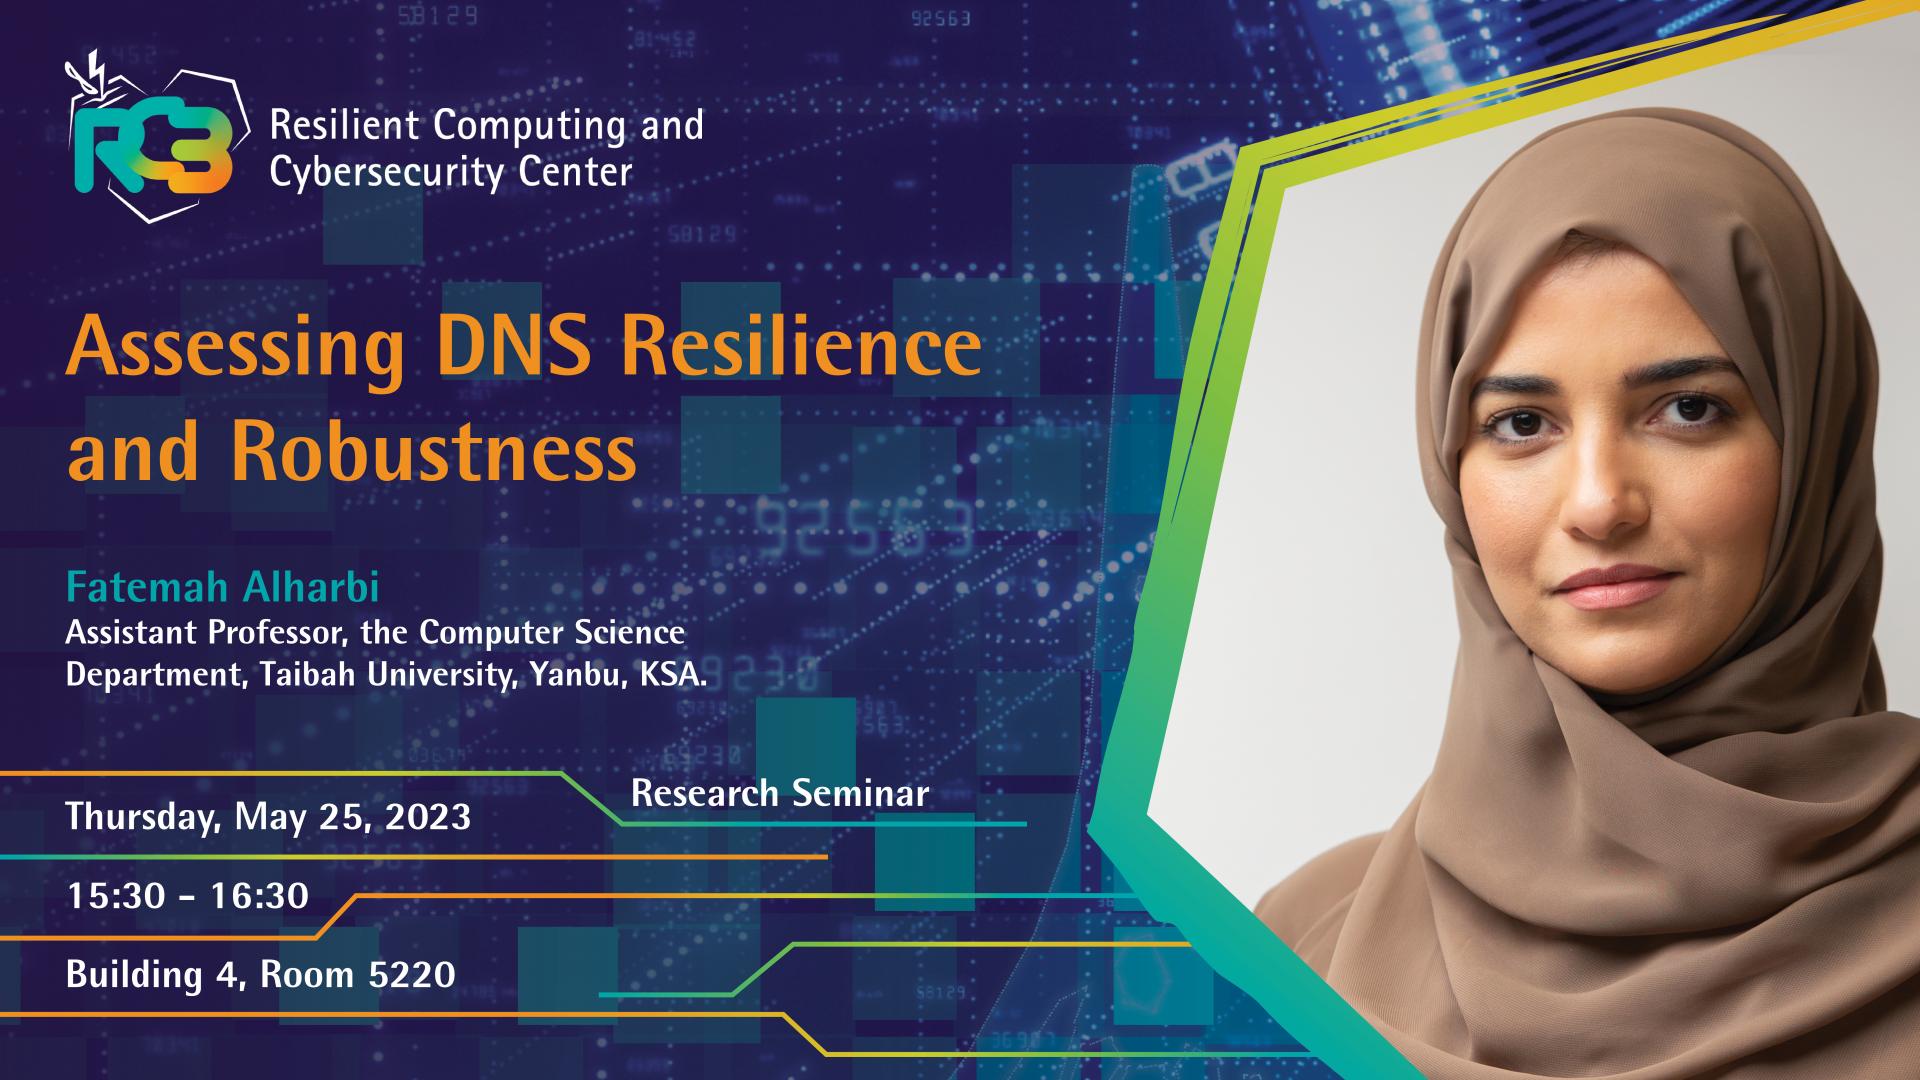 RC3-Research-Seminar-Assessing-DNS-Resilience-and-Robustness-Fatemah-Alharbi